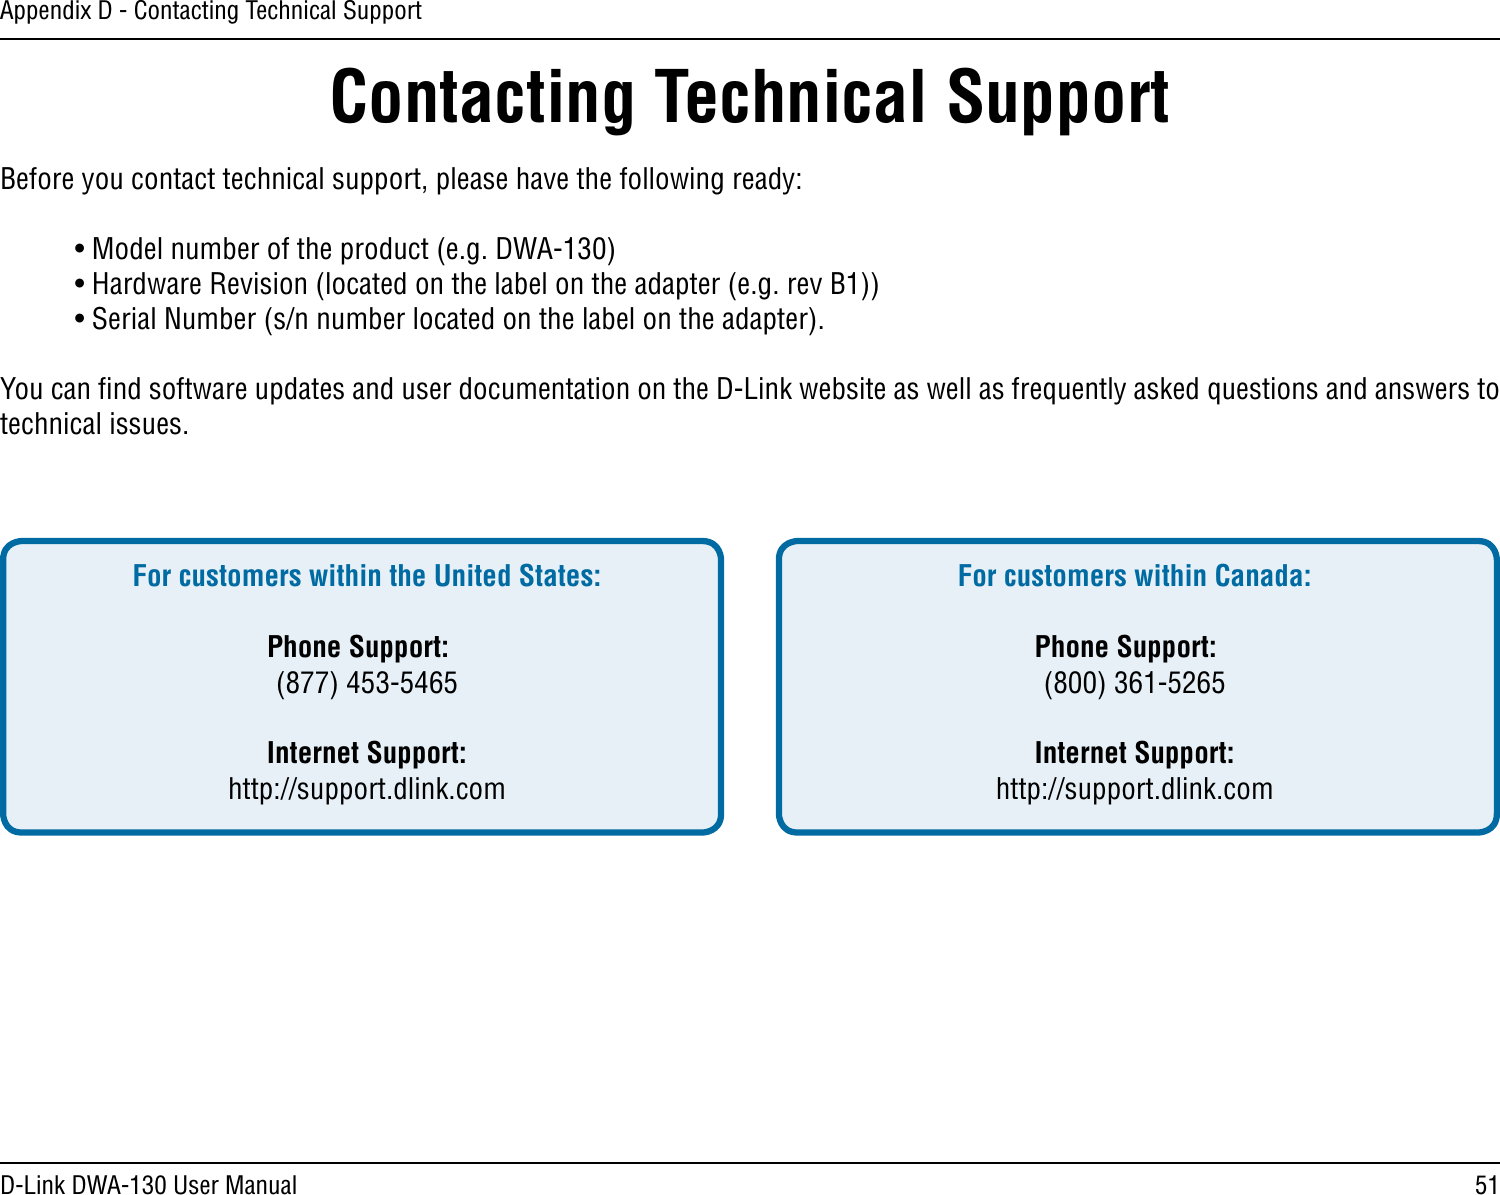 51D-Link DWA-130 User ManualAppendix D - Contacting Technical SupportContacting Technical SupportBefore you contact technical support, please have the following ready:  • Model number of the product (e.g. DWA-130)  • Hardware Revision (located on the label on the adapter (e.g. rev B1))  • Serial Number (s/n number located on the label on the adapter). You can ﬁnd software updates and user documentation on the D-Link website as well as frequently asked questions and answers to technical issues.For customers within the United States: Phone Support:  (877) 453-5465 Internet Support:  http://support.dlink.com For customers within Canada: Phone Support:  (800) 361-5265    Internet Support:  http://support.dlink.com 